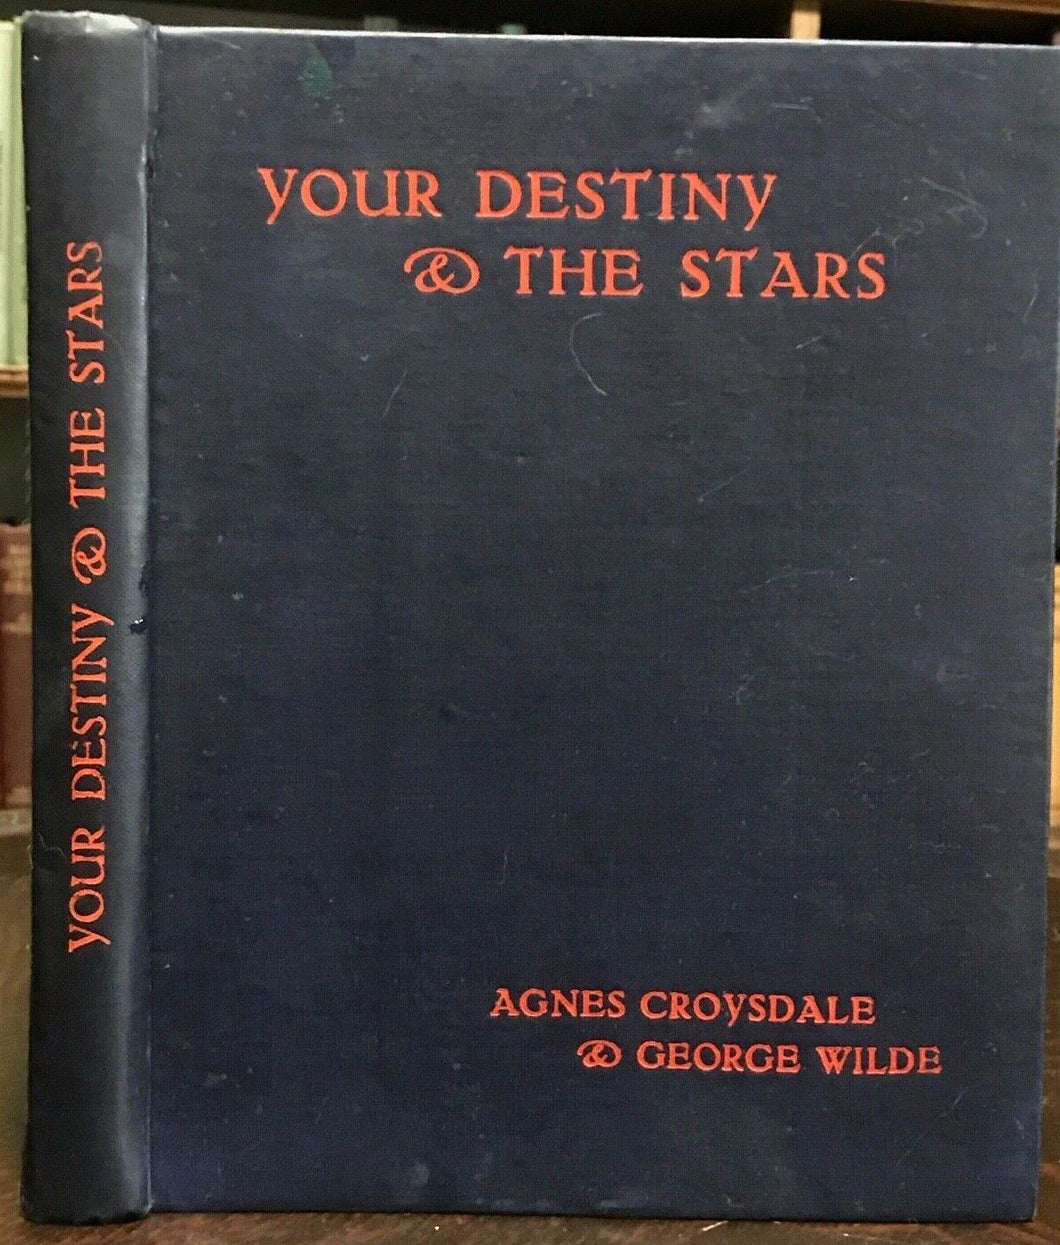 YOUR DESTINY AND THE STARS - 1st, 1915 - OCCULT ASTROLOGY DIVINATION HOROSCOPE